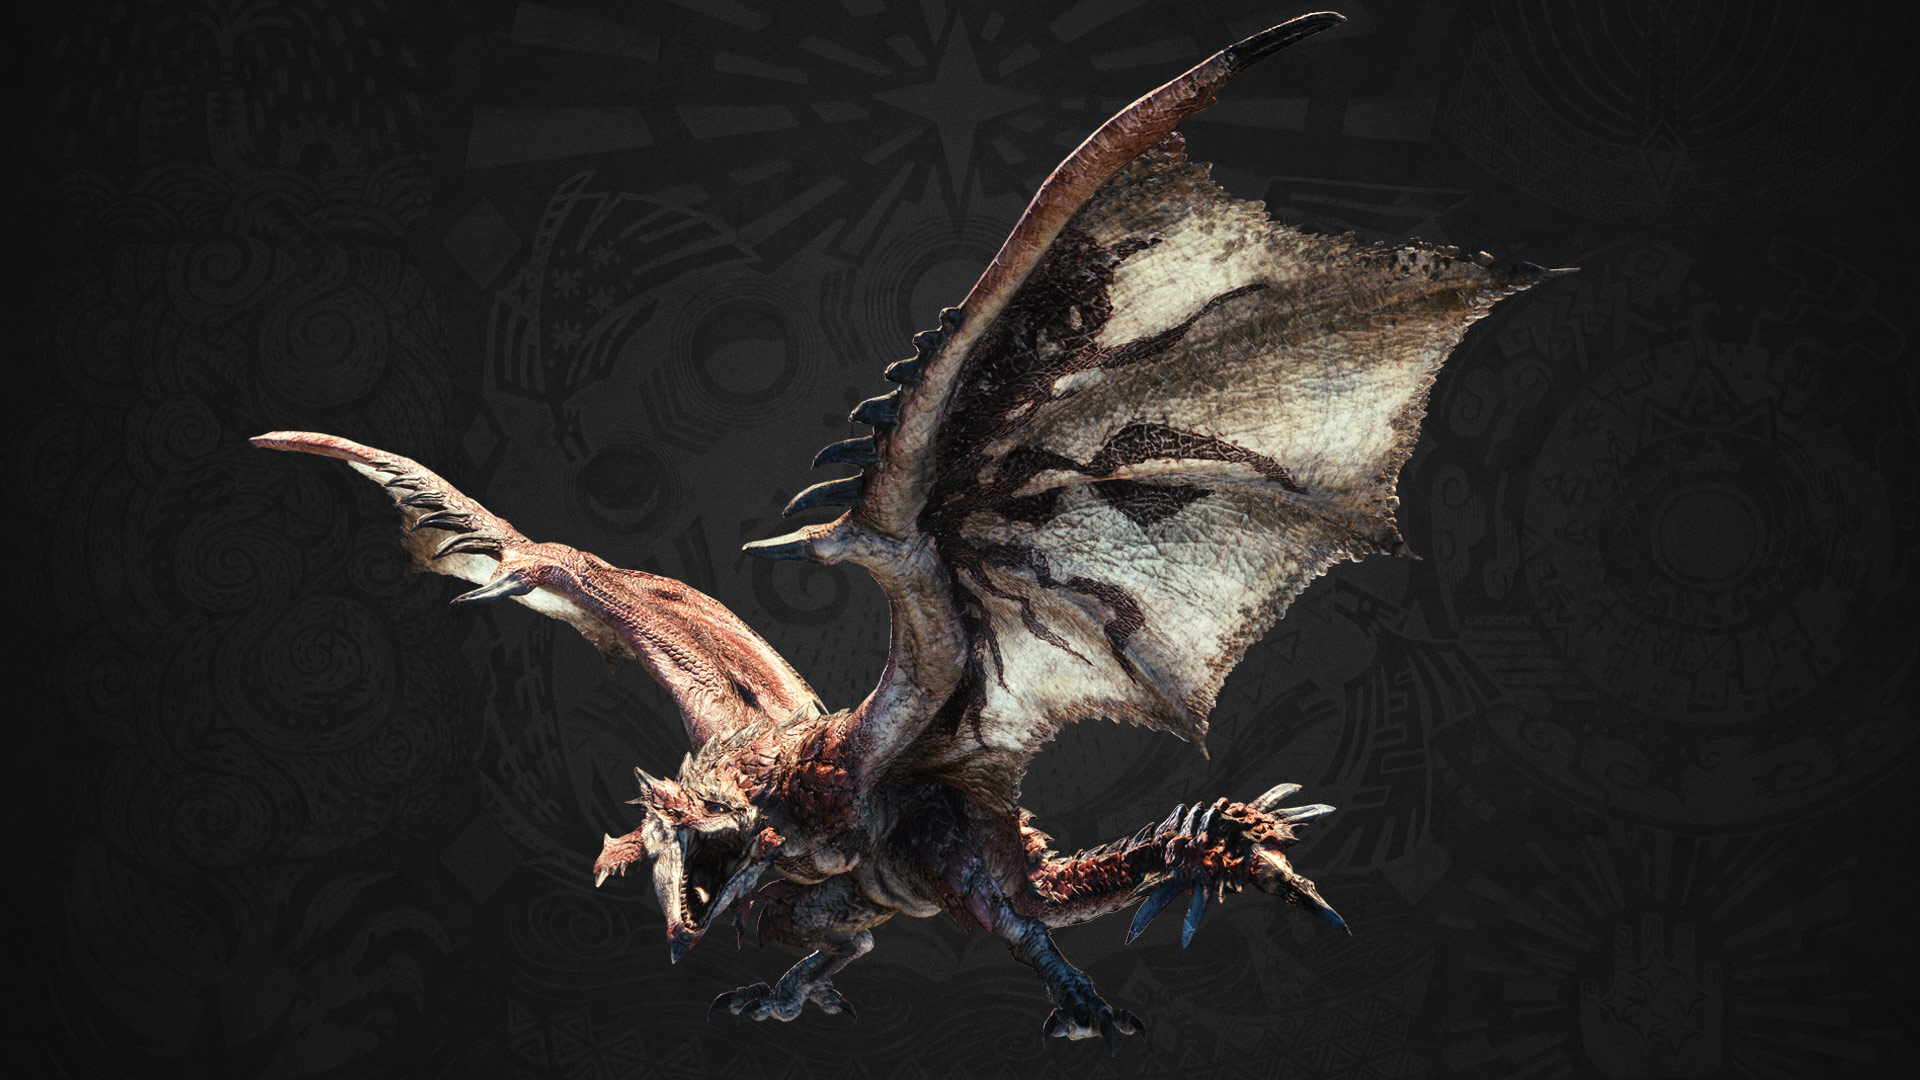 HD desktop wallpaper featuring a detailed dragon from Monster Hunter: World against an ornate background.